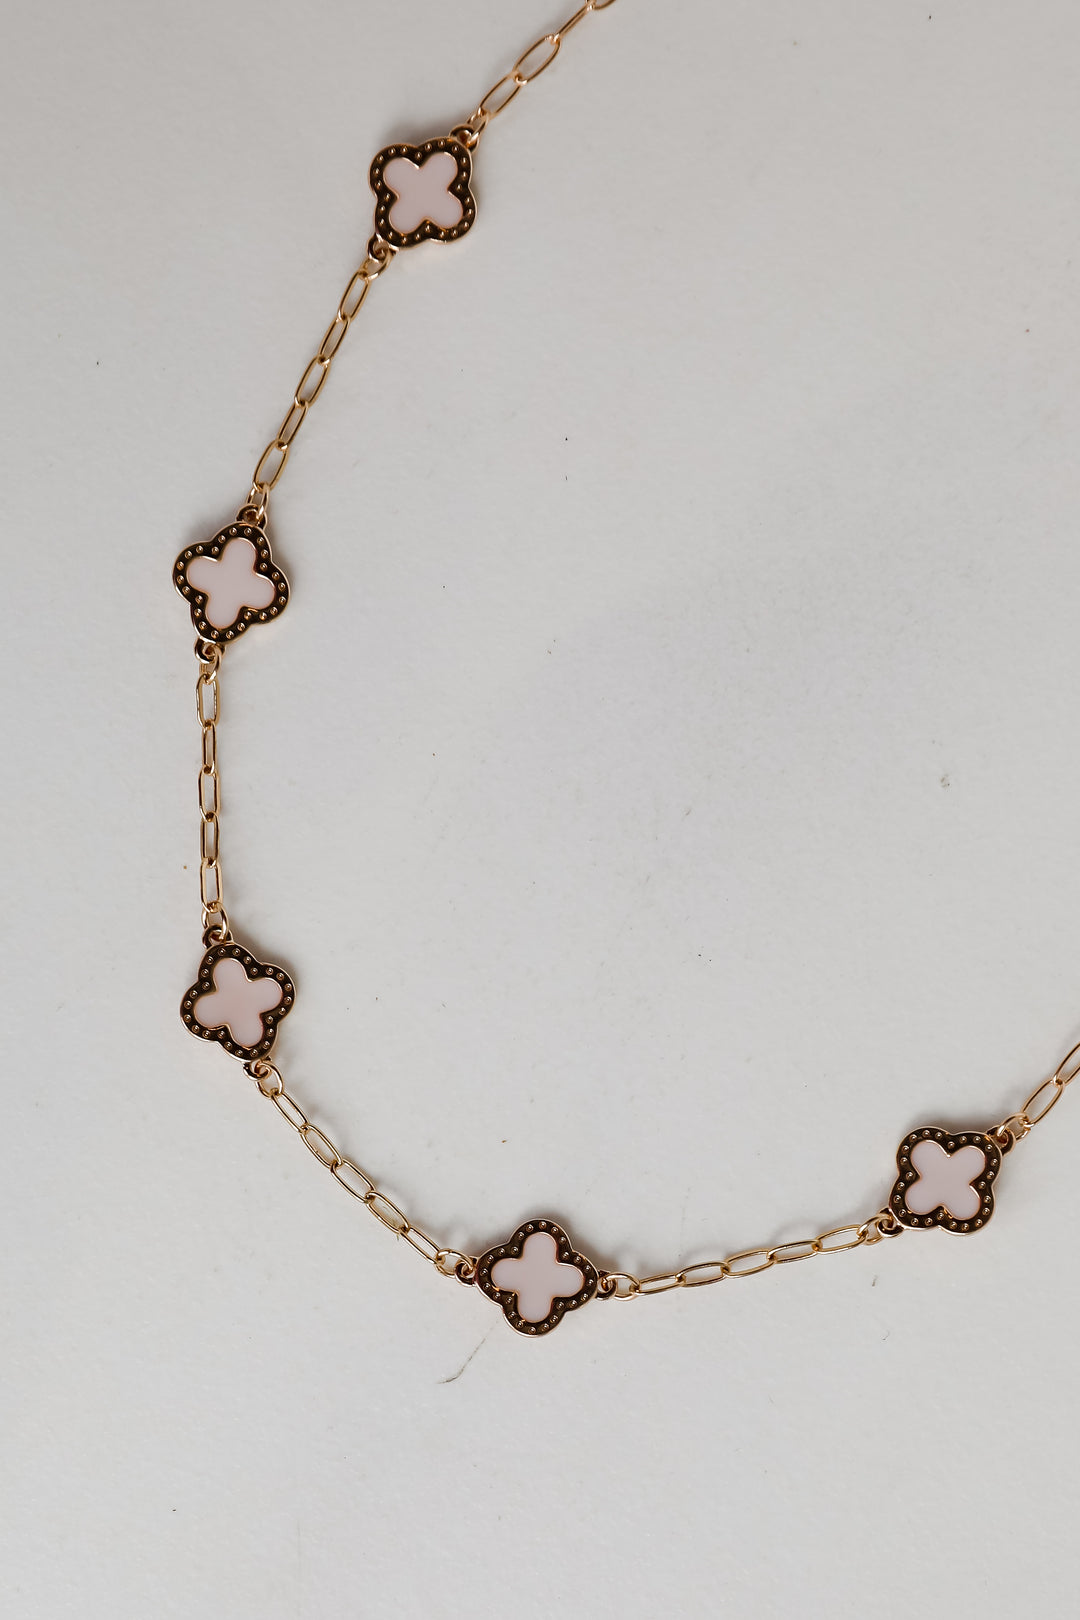 Mariah Gold Chain Necklace dainty jewelry